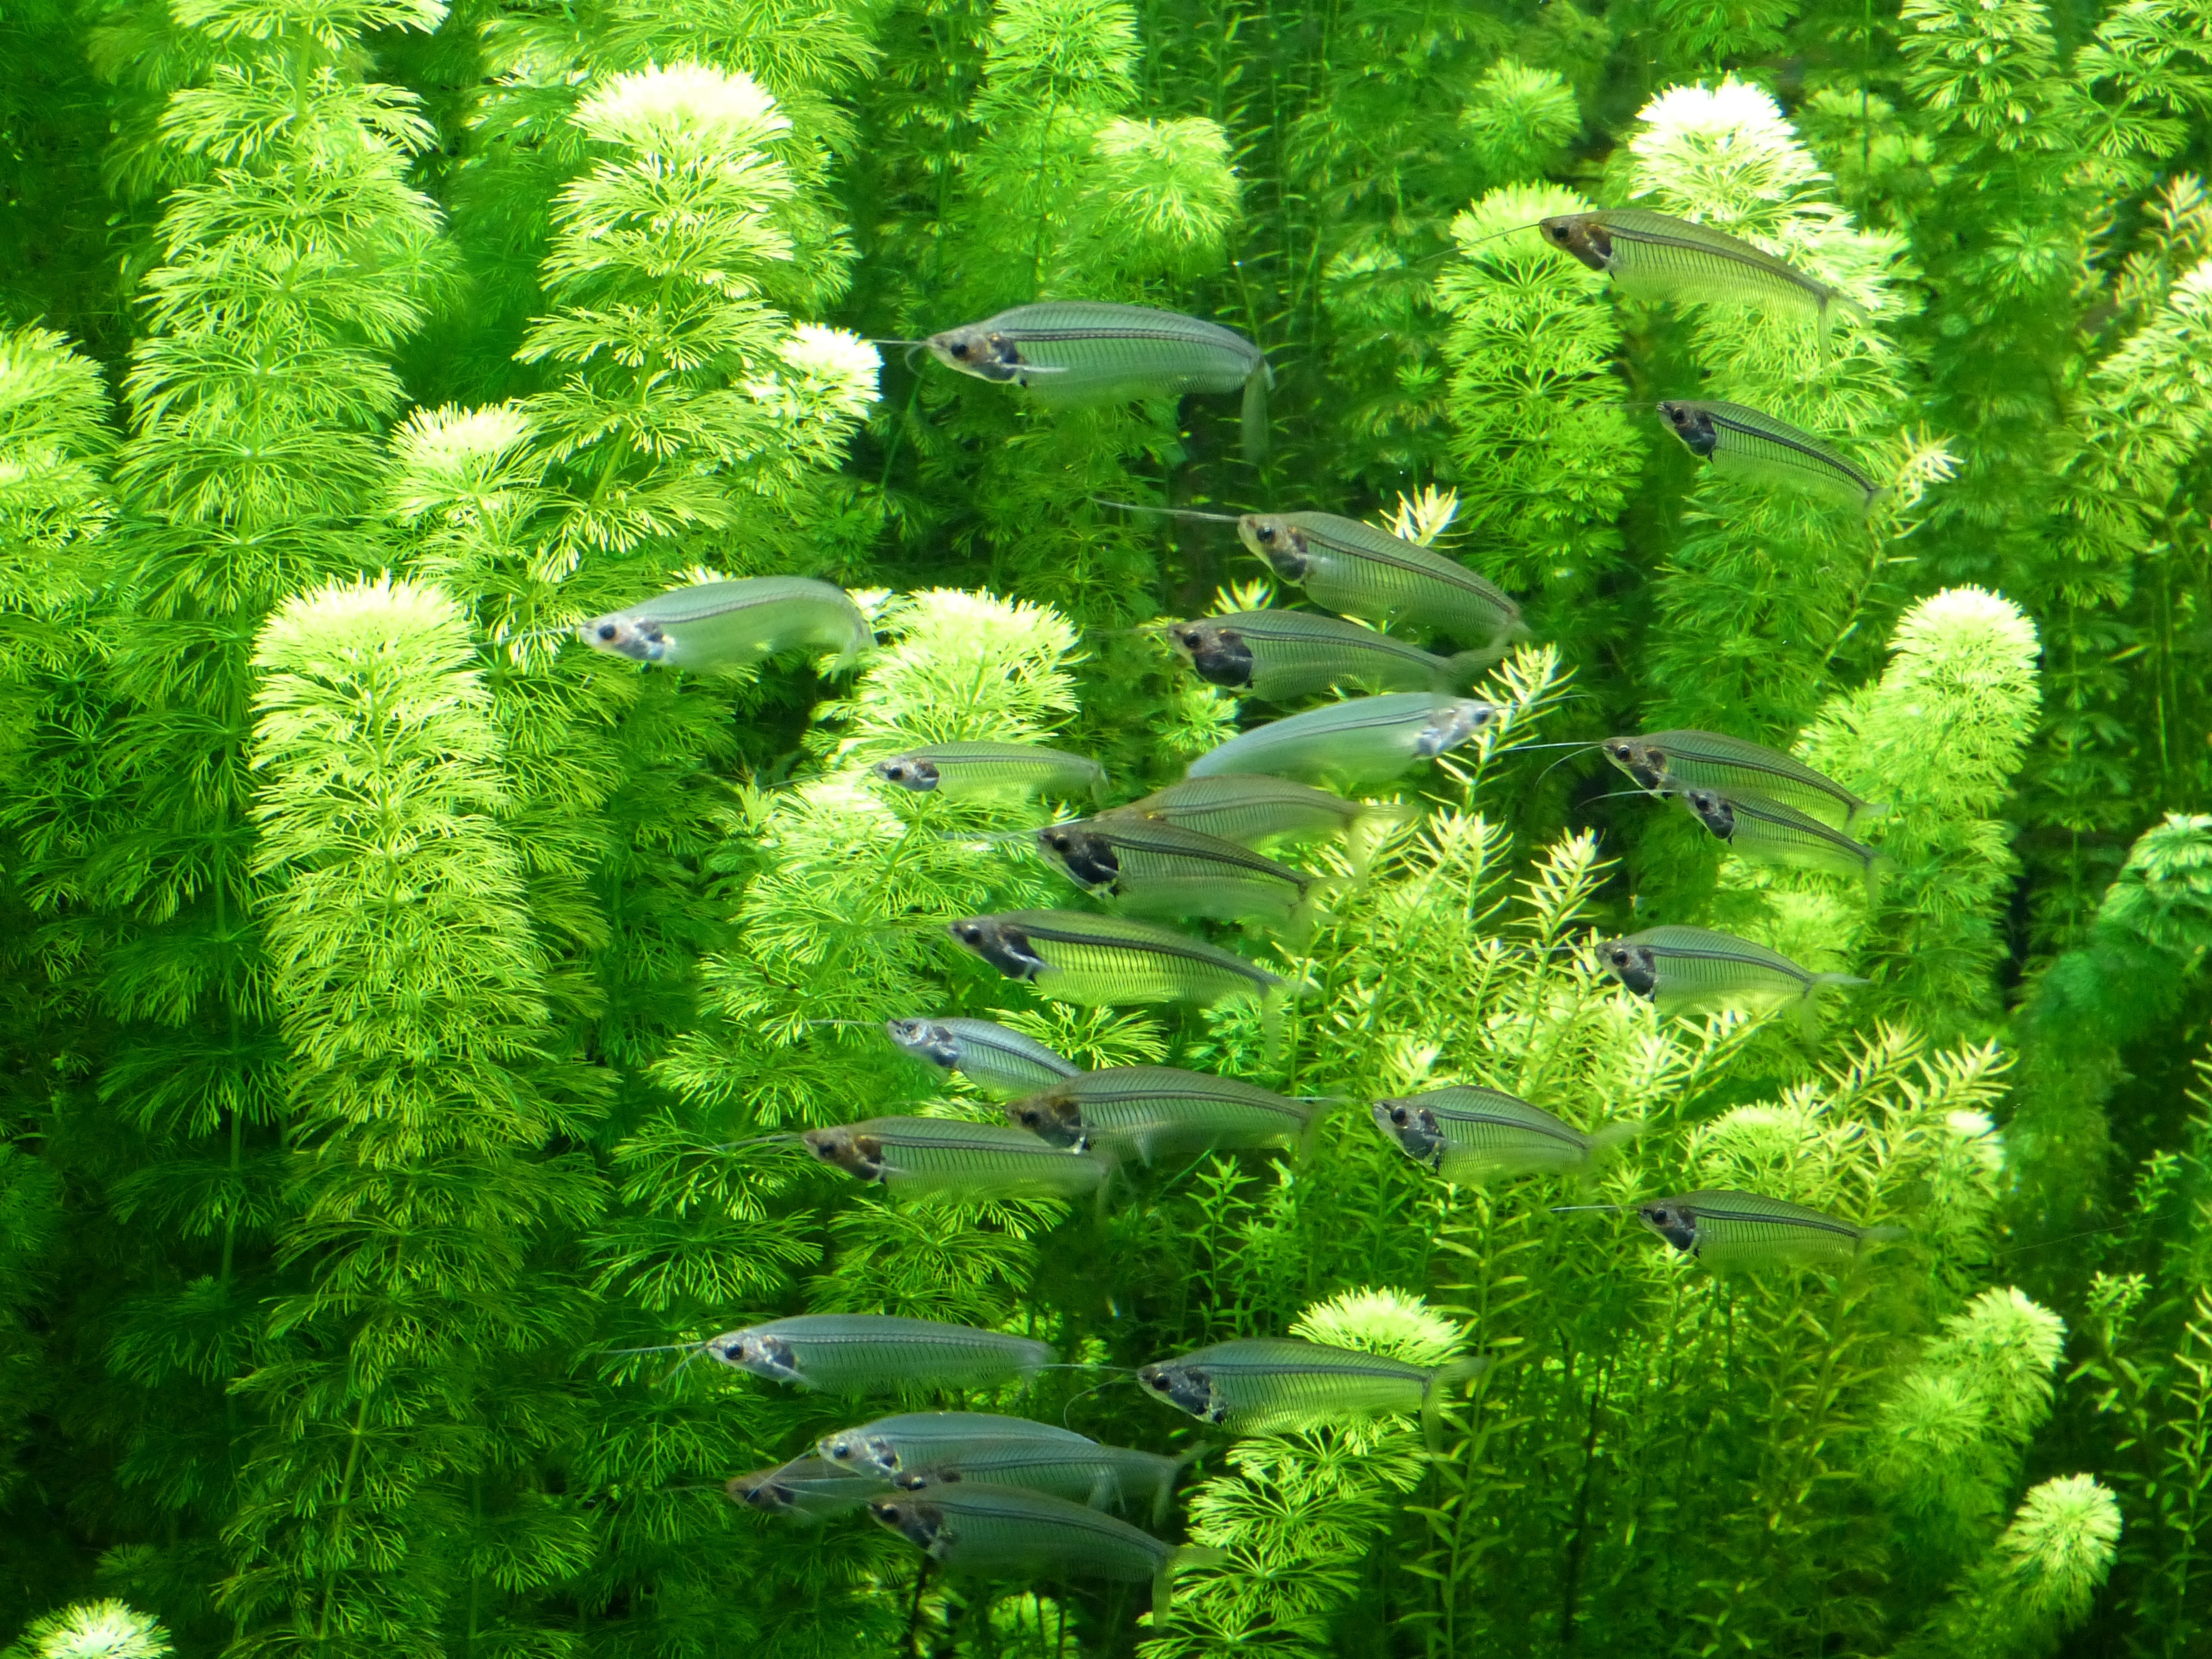 group of fish